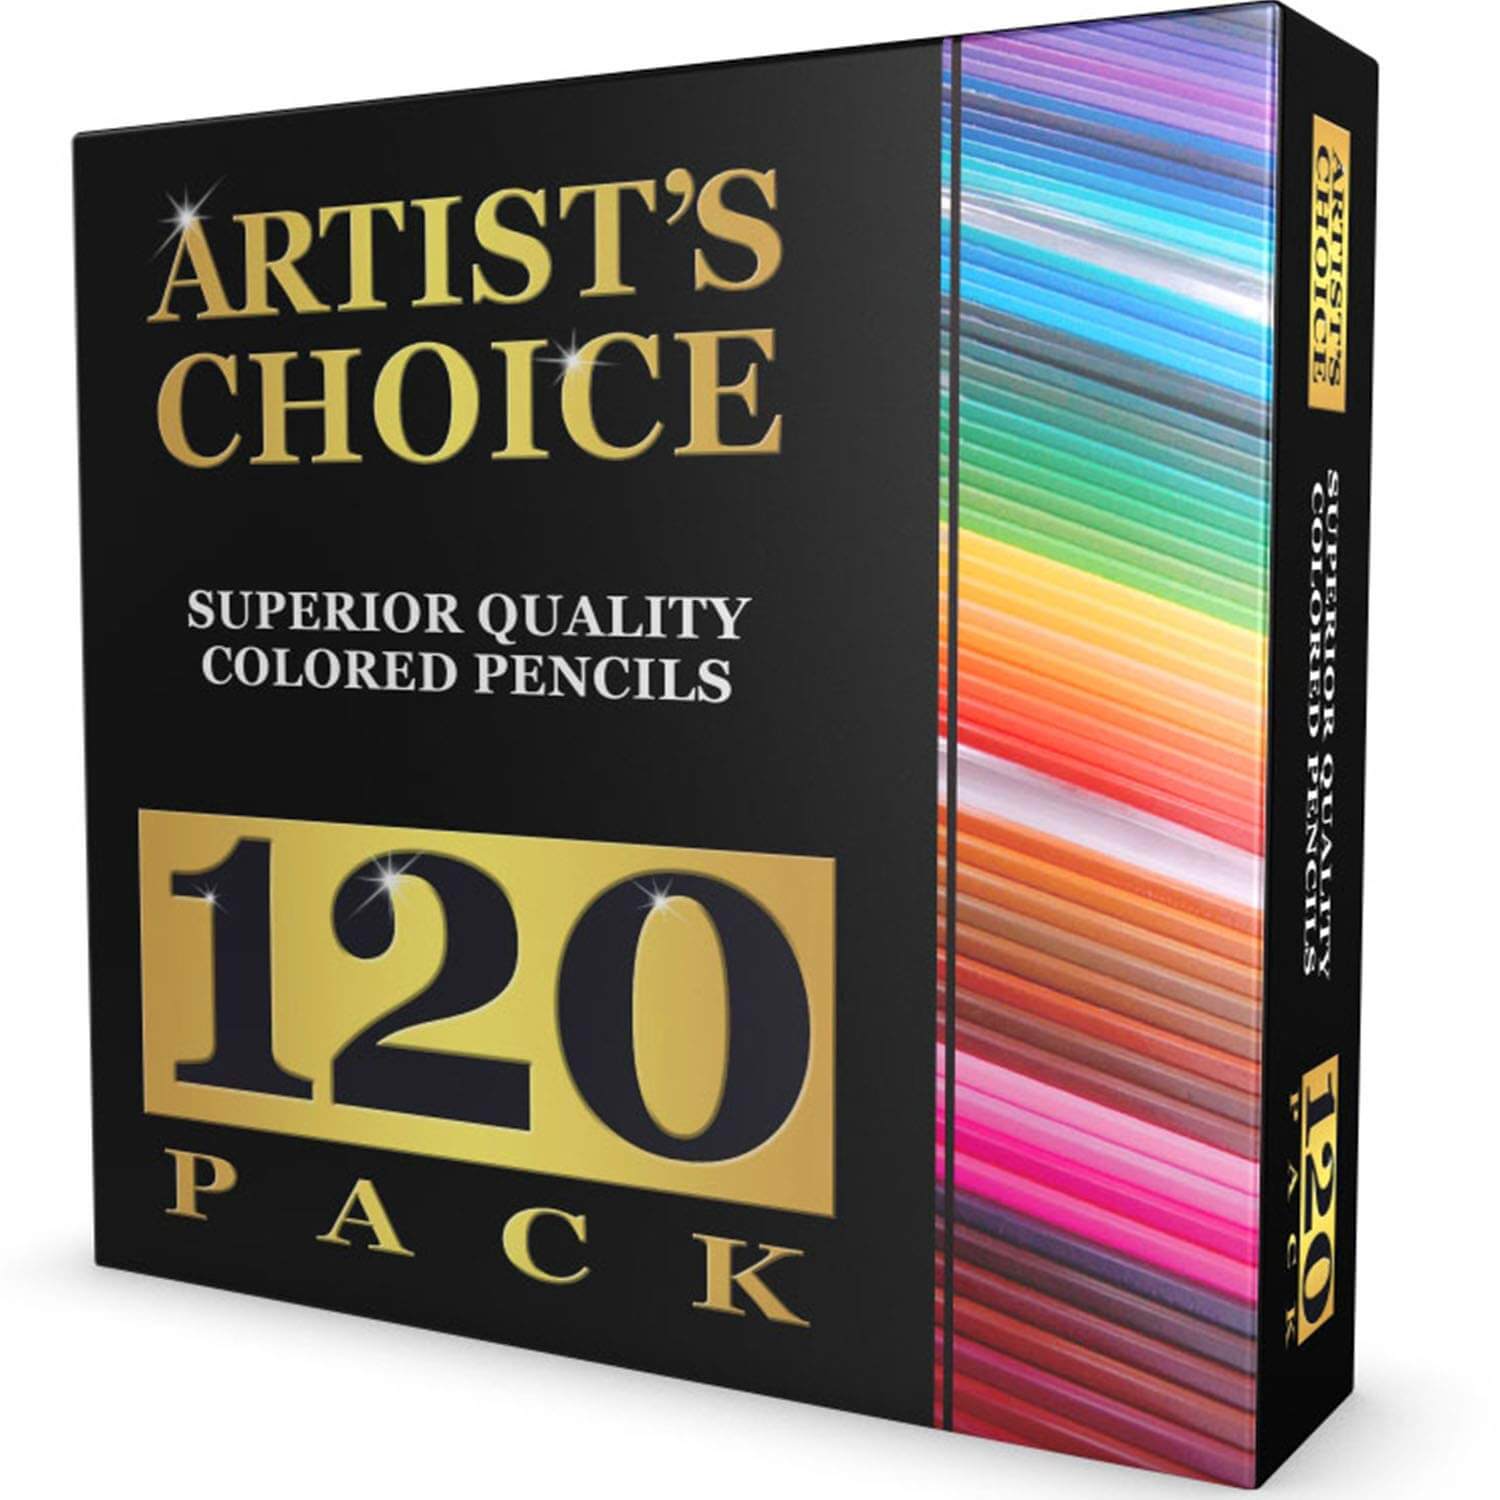 The Ultimate Adult Coloring Book Kit